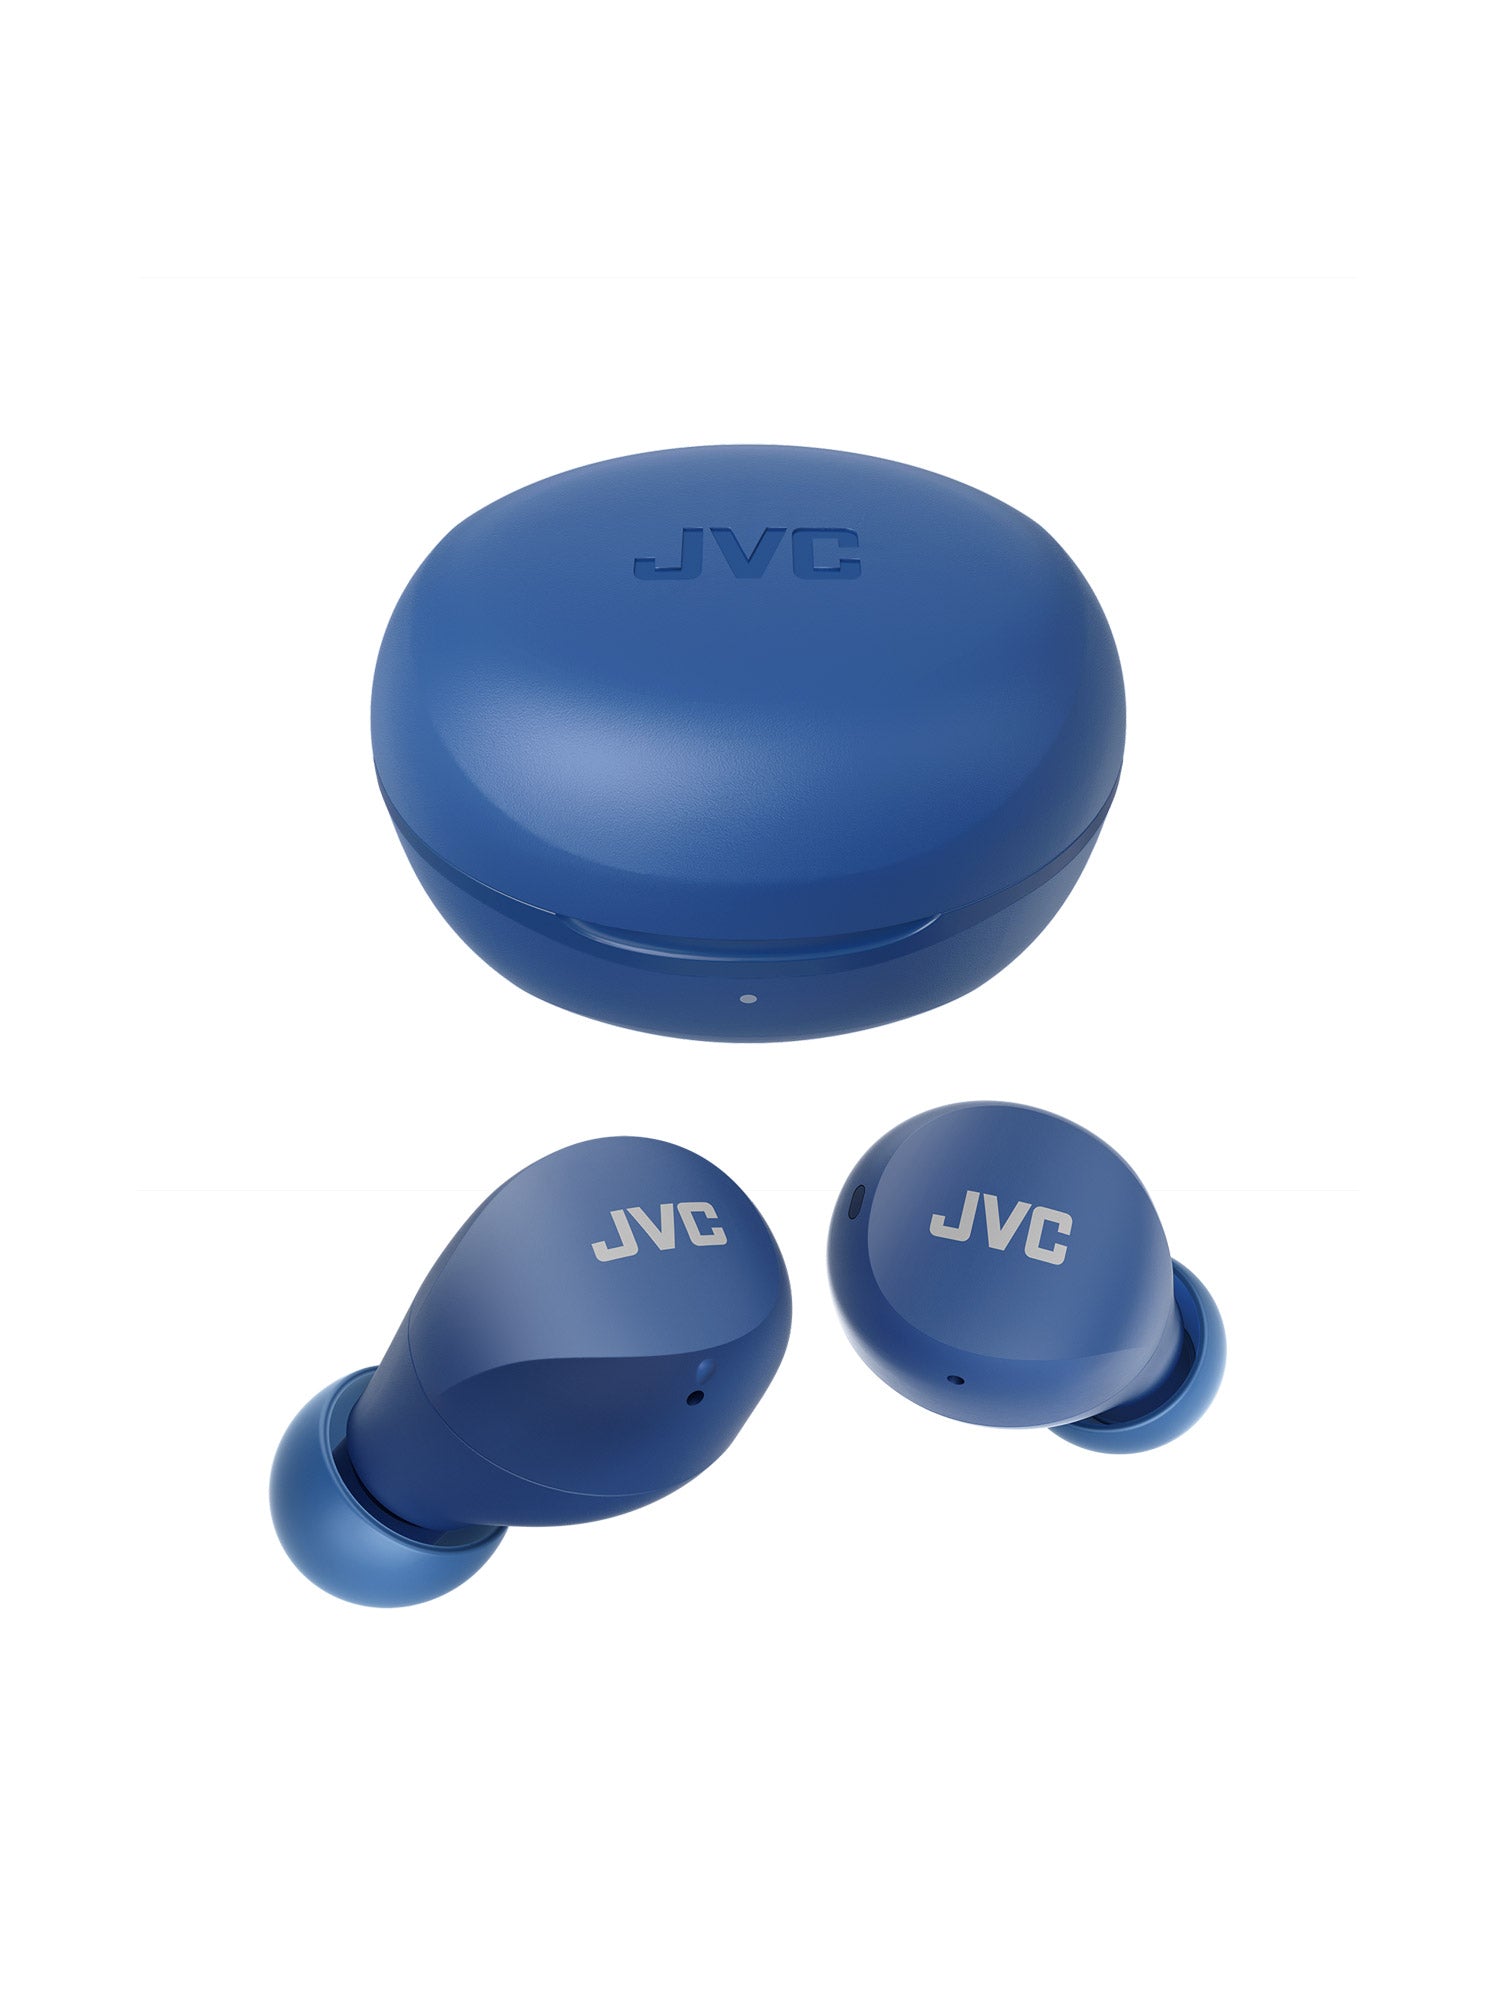 HA-A6T-A in Blue Gumy mini wireless earbuds & charger by JVC